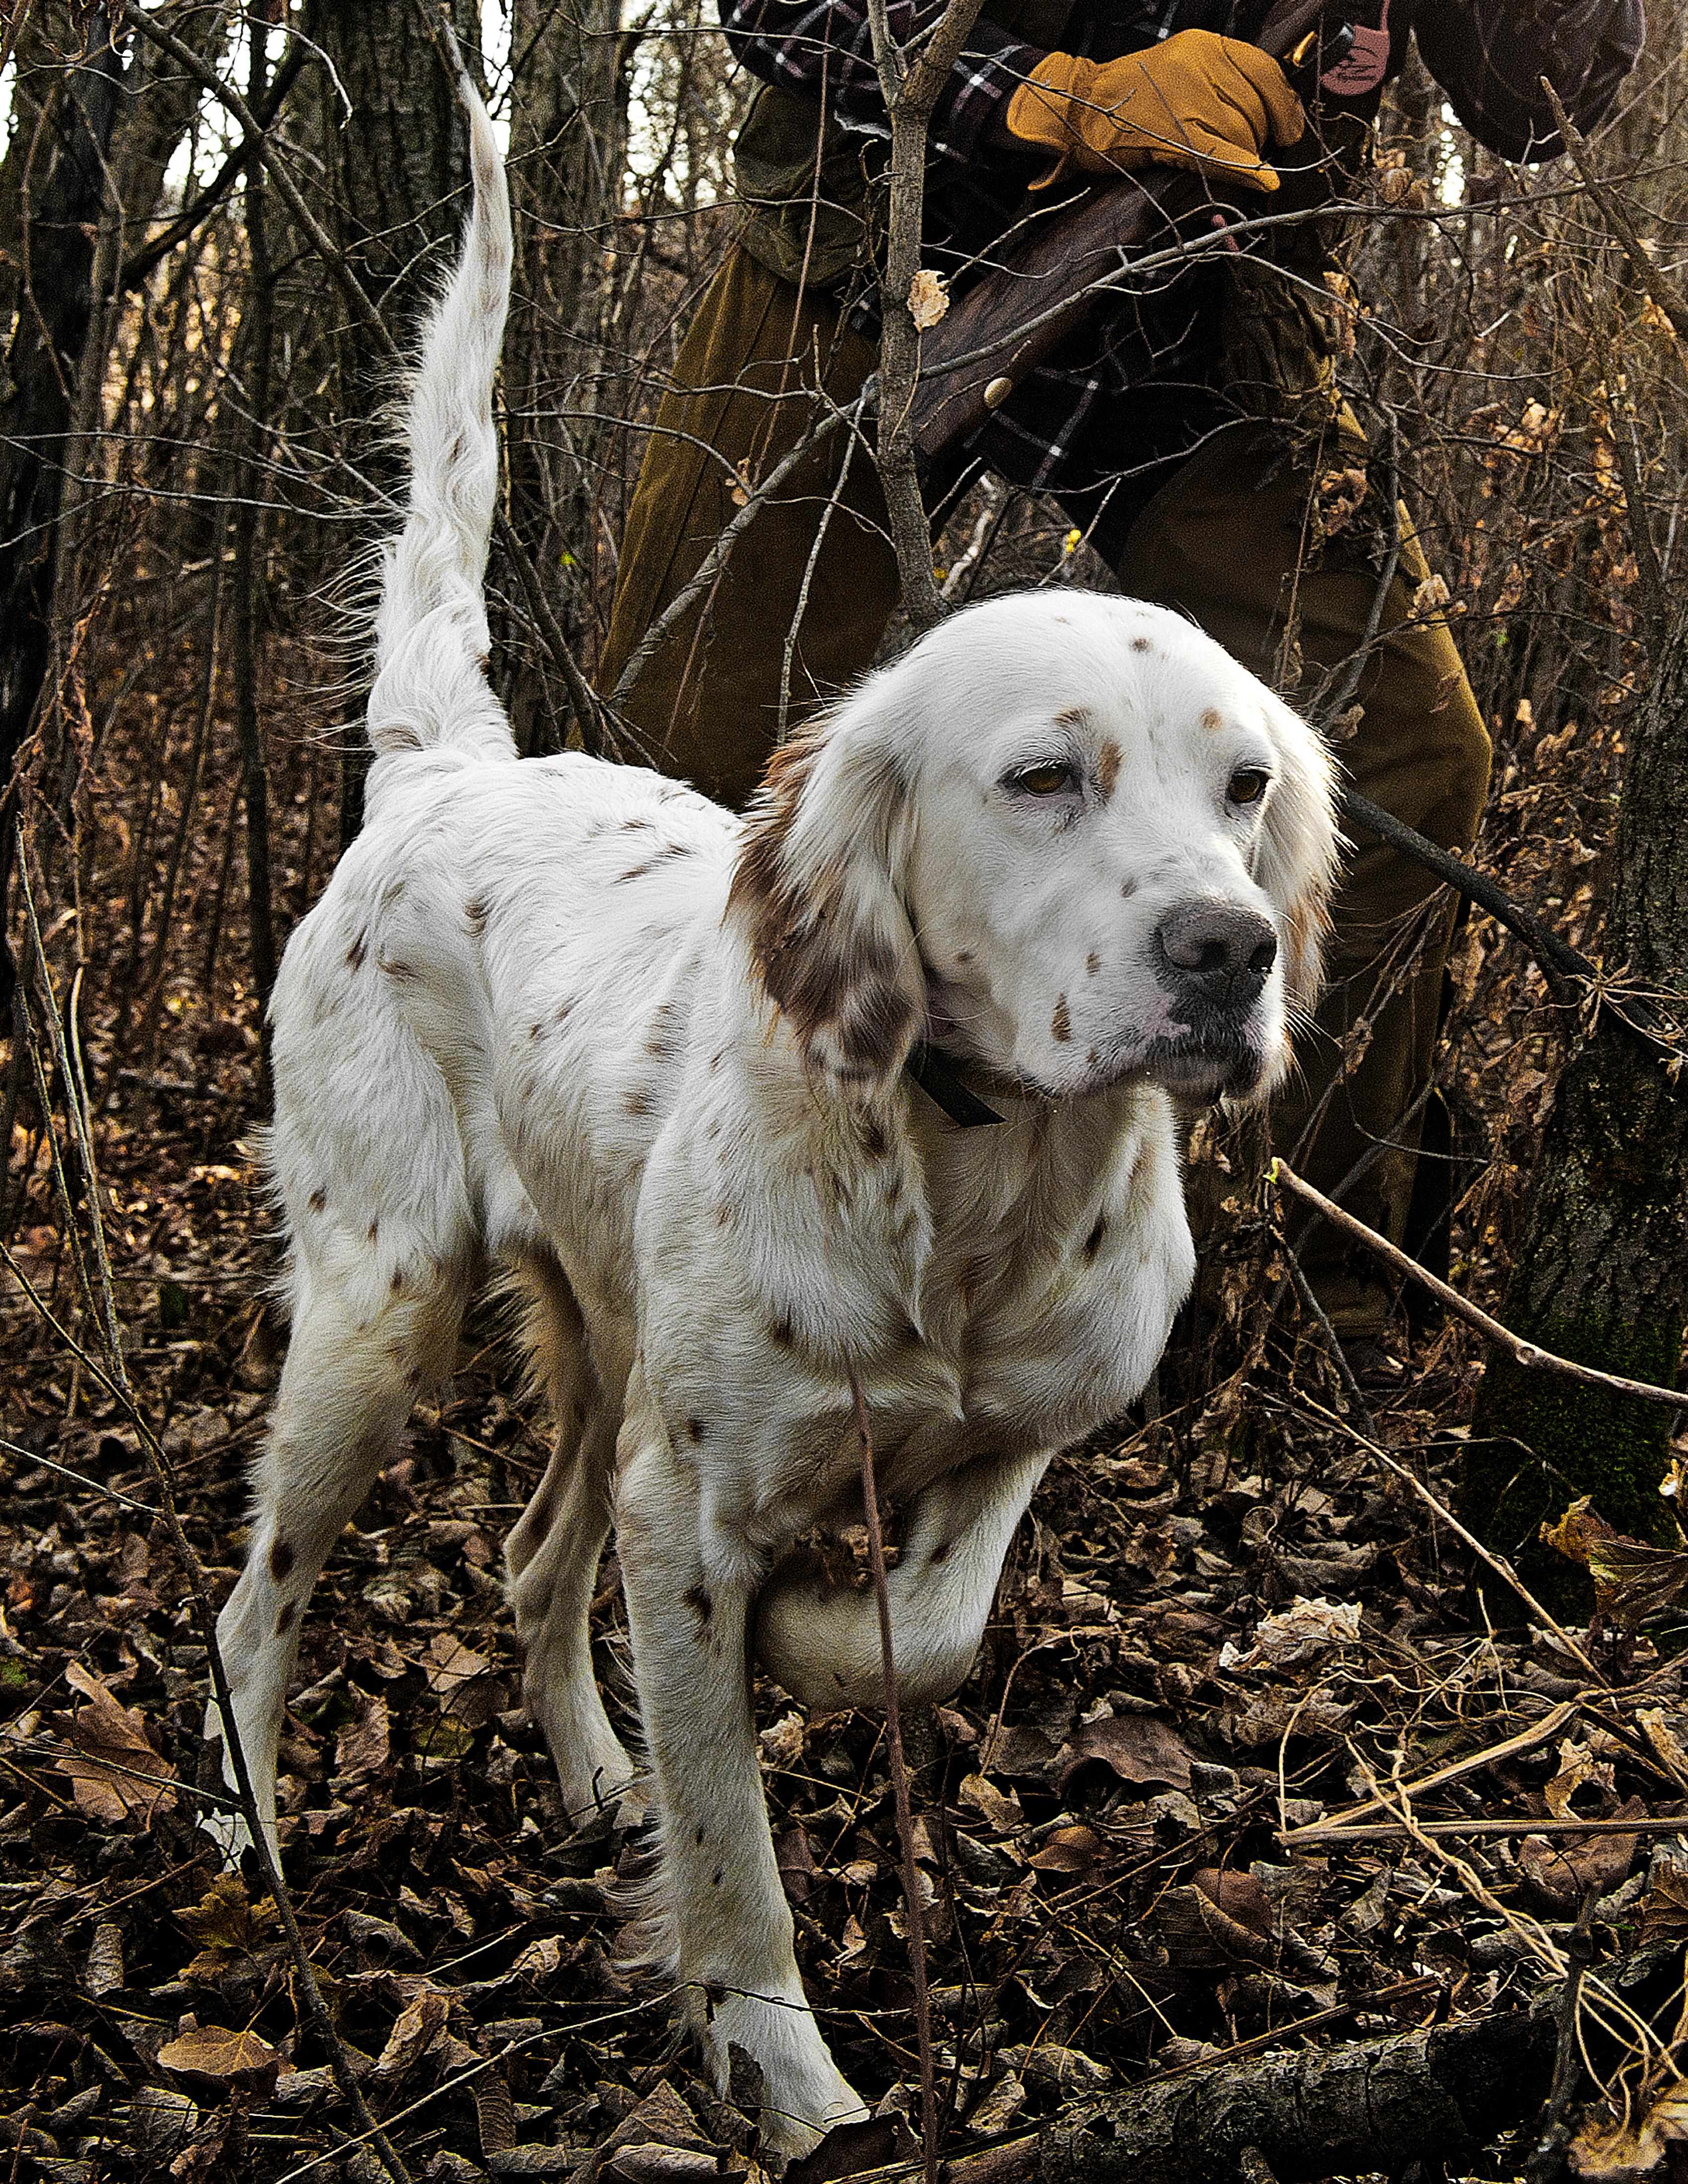 Setter on point with hunter walking up behind with gun ready